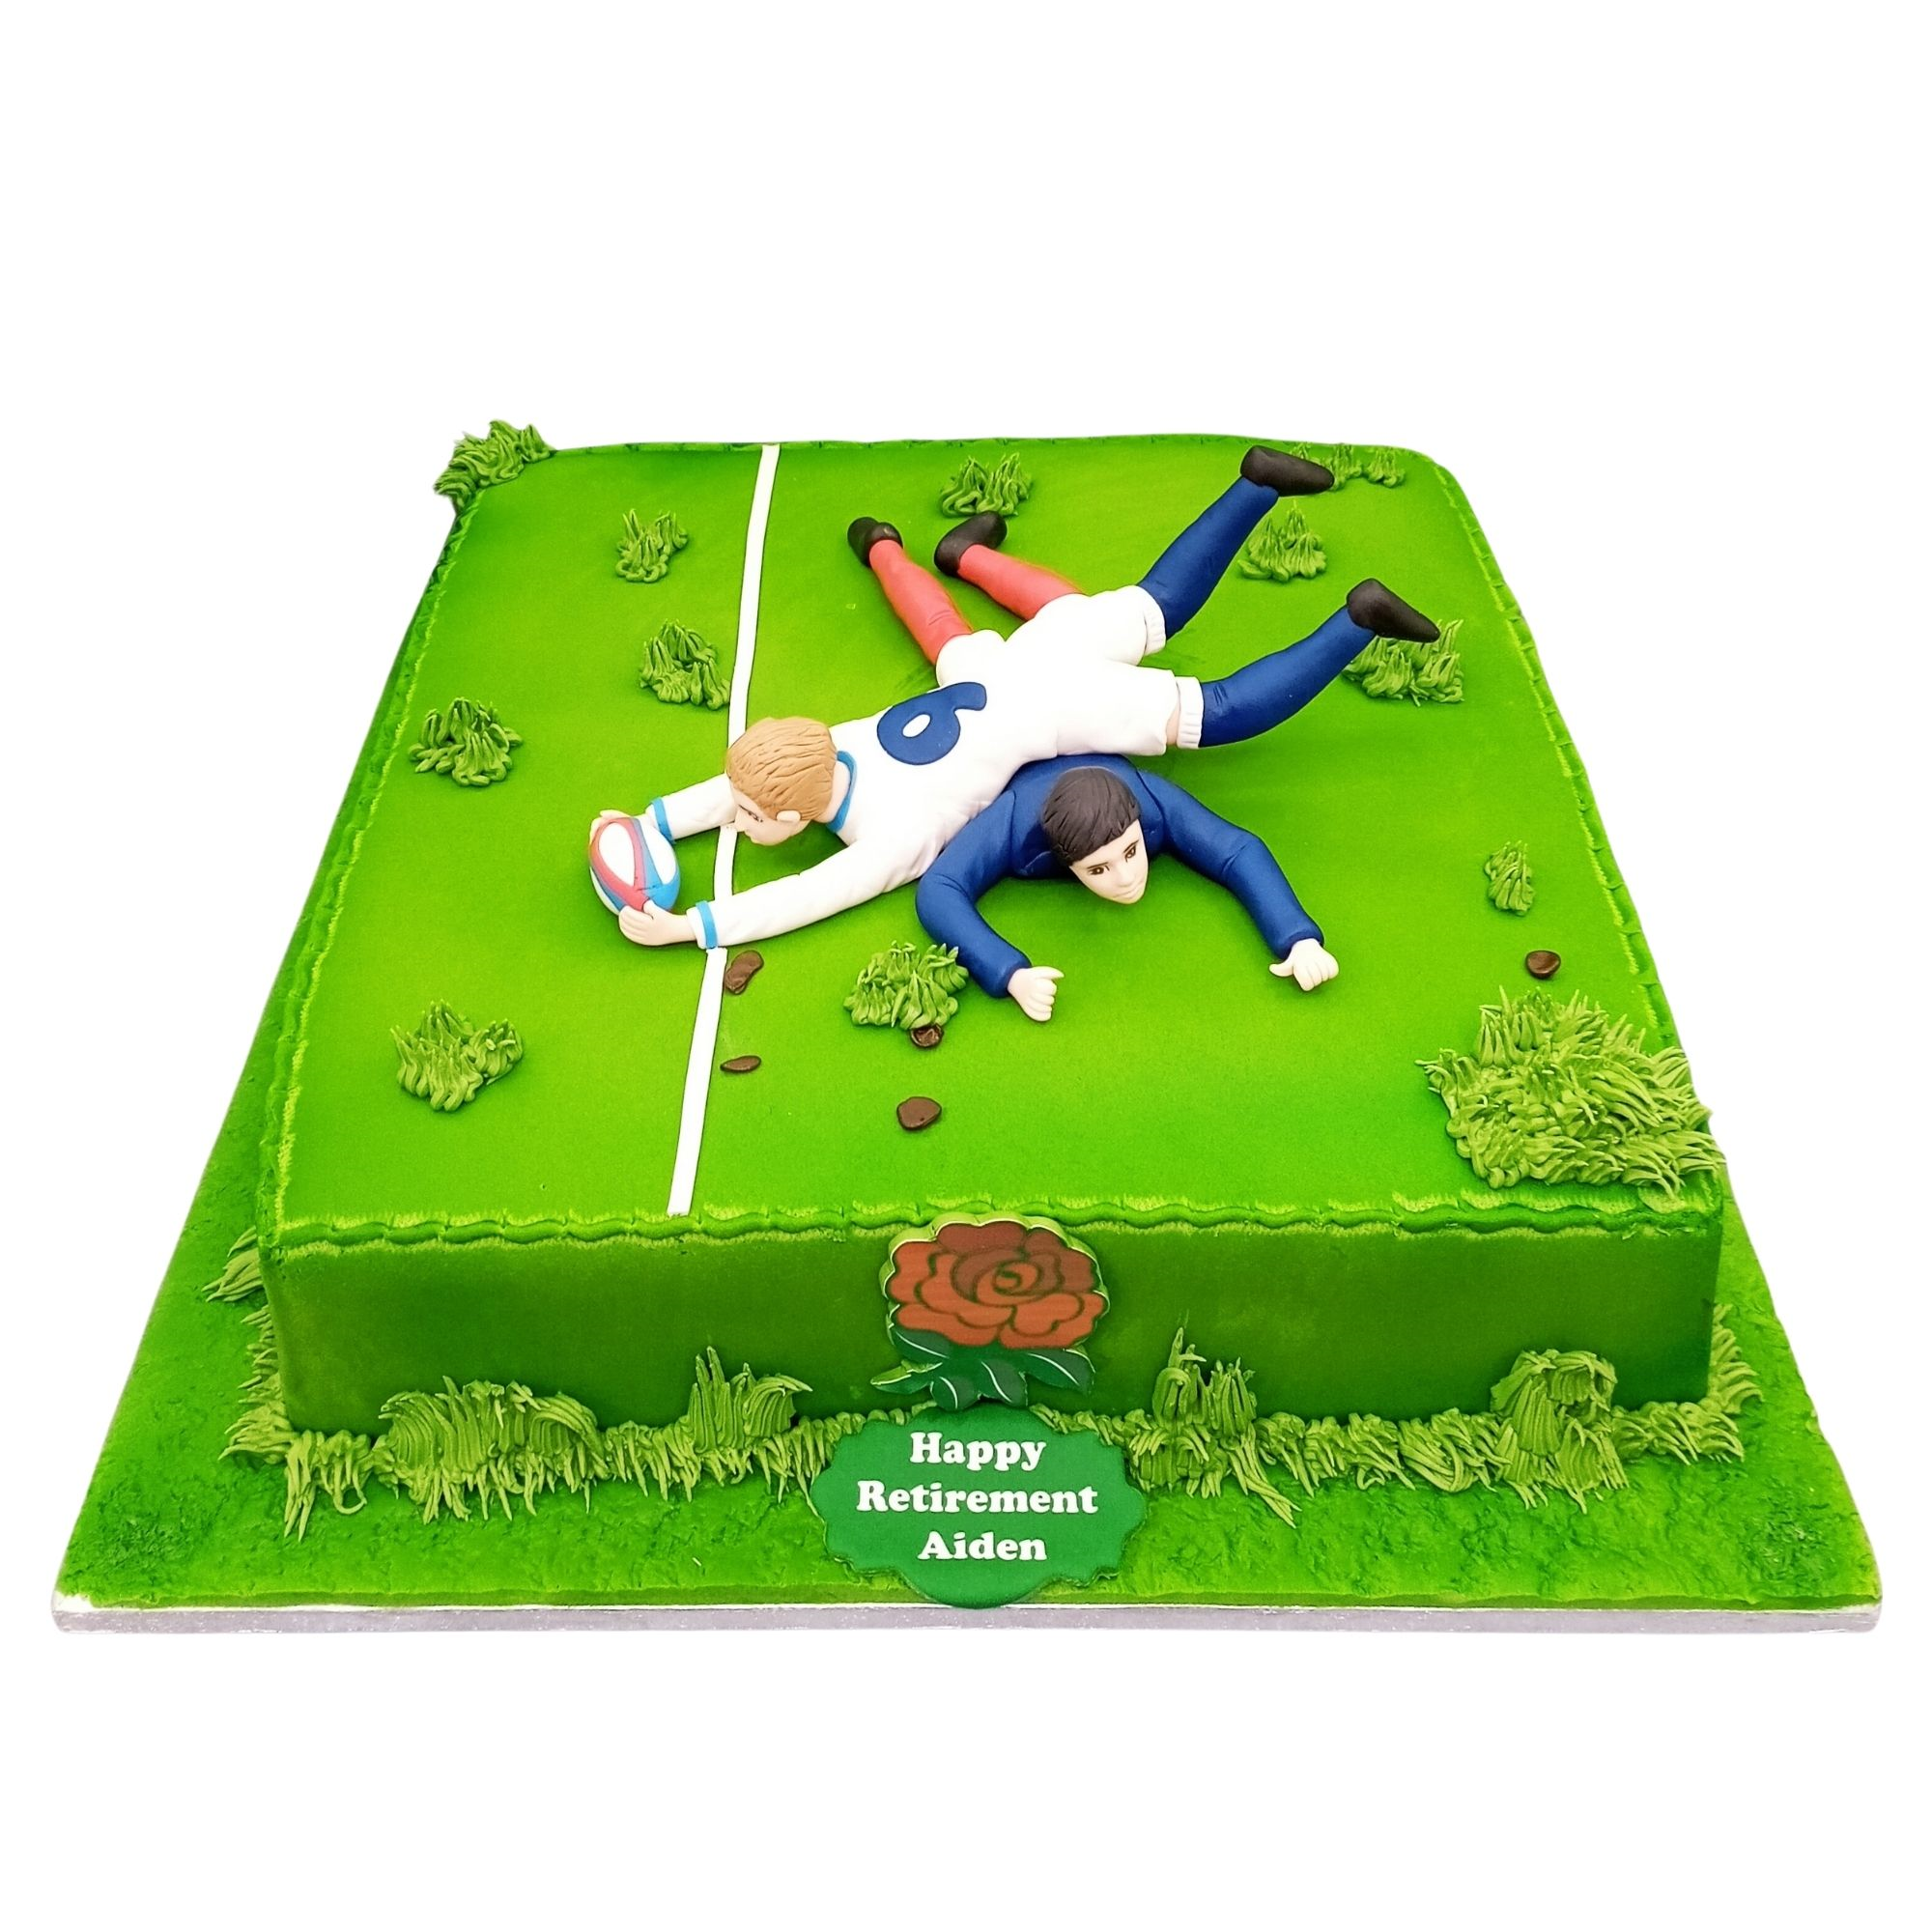 Rugby Match themed Birthday Cake